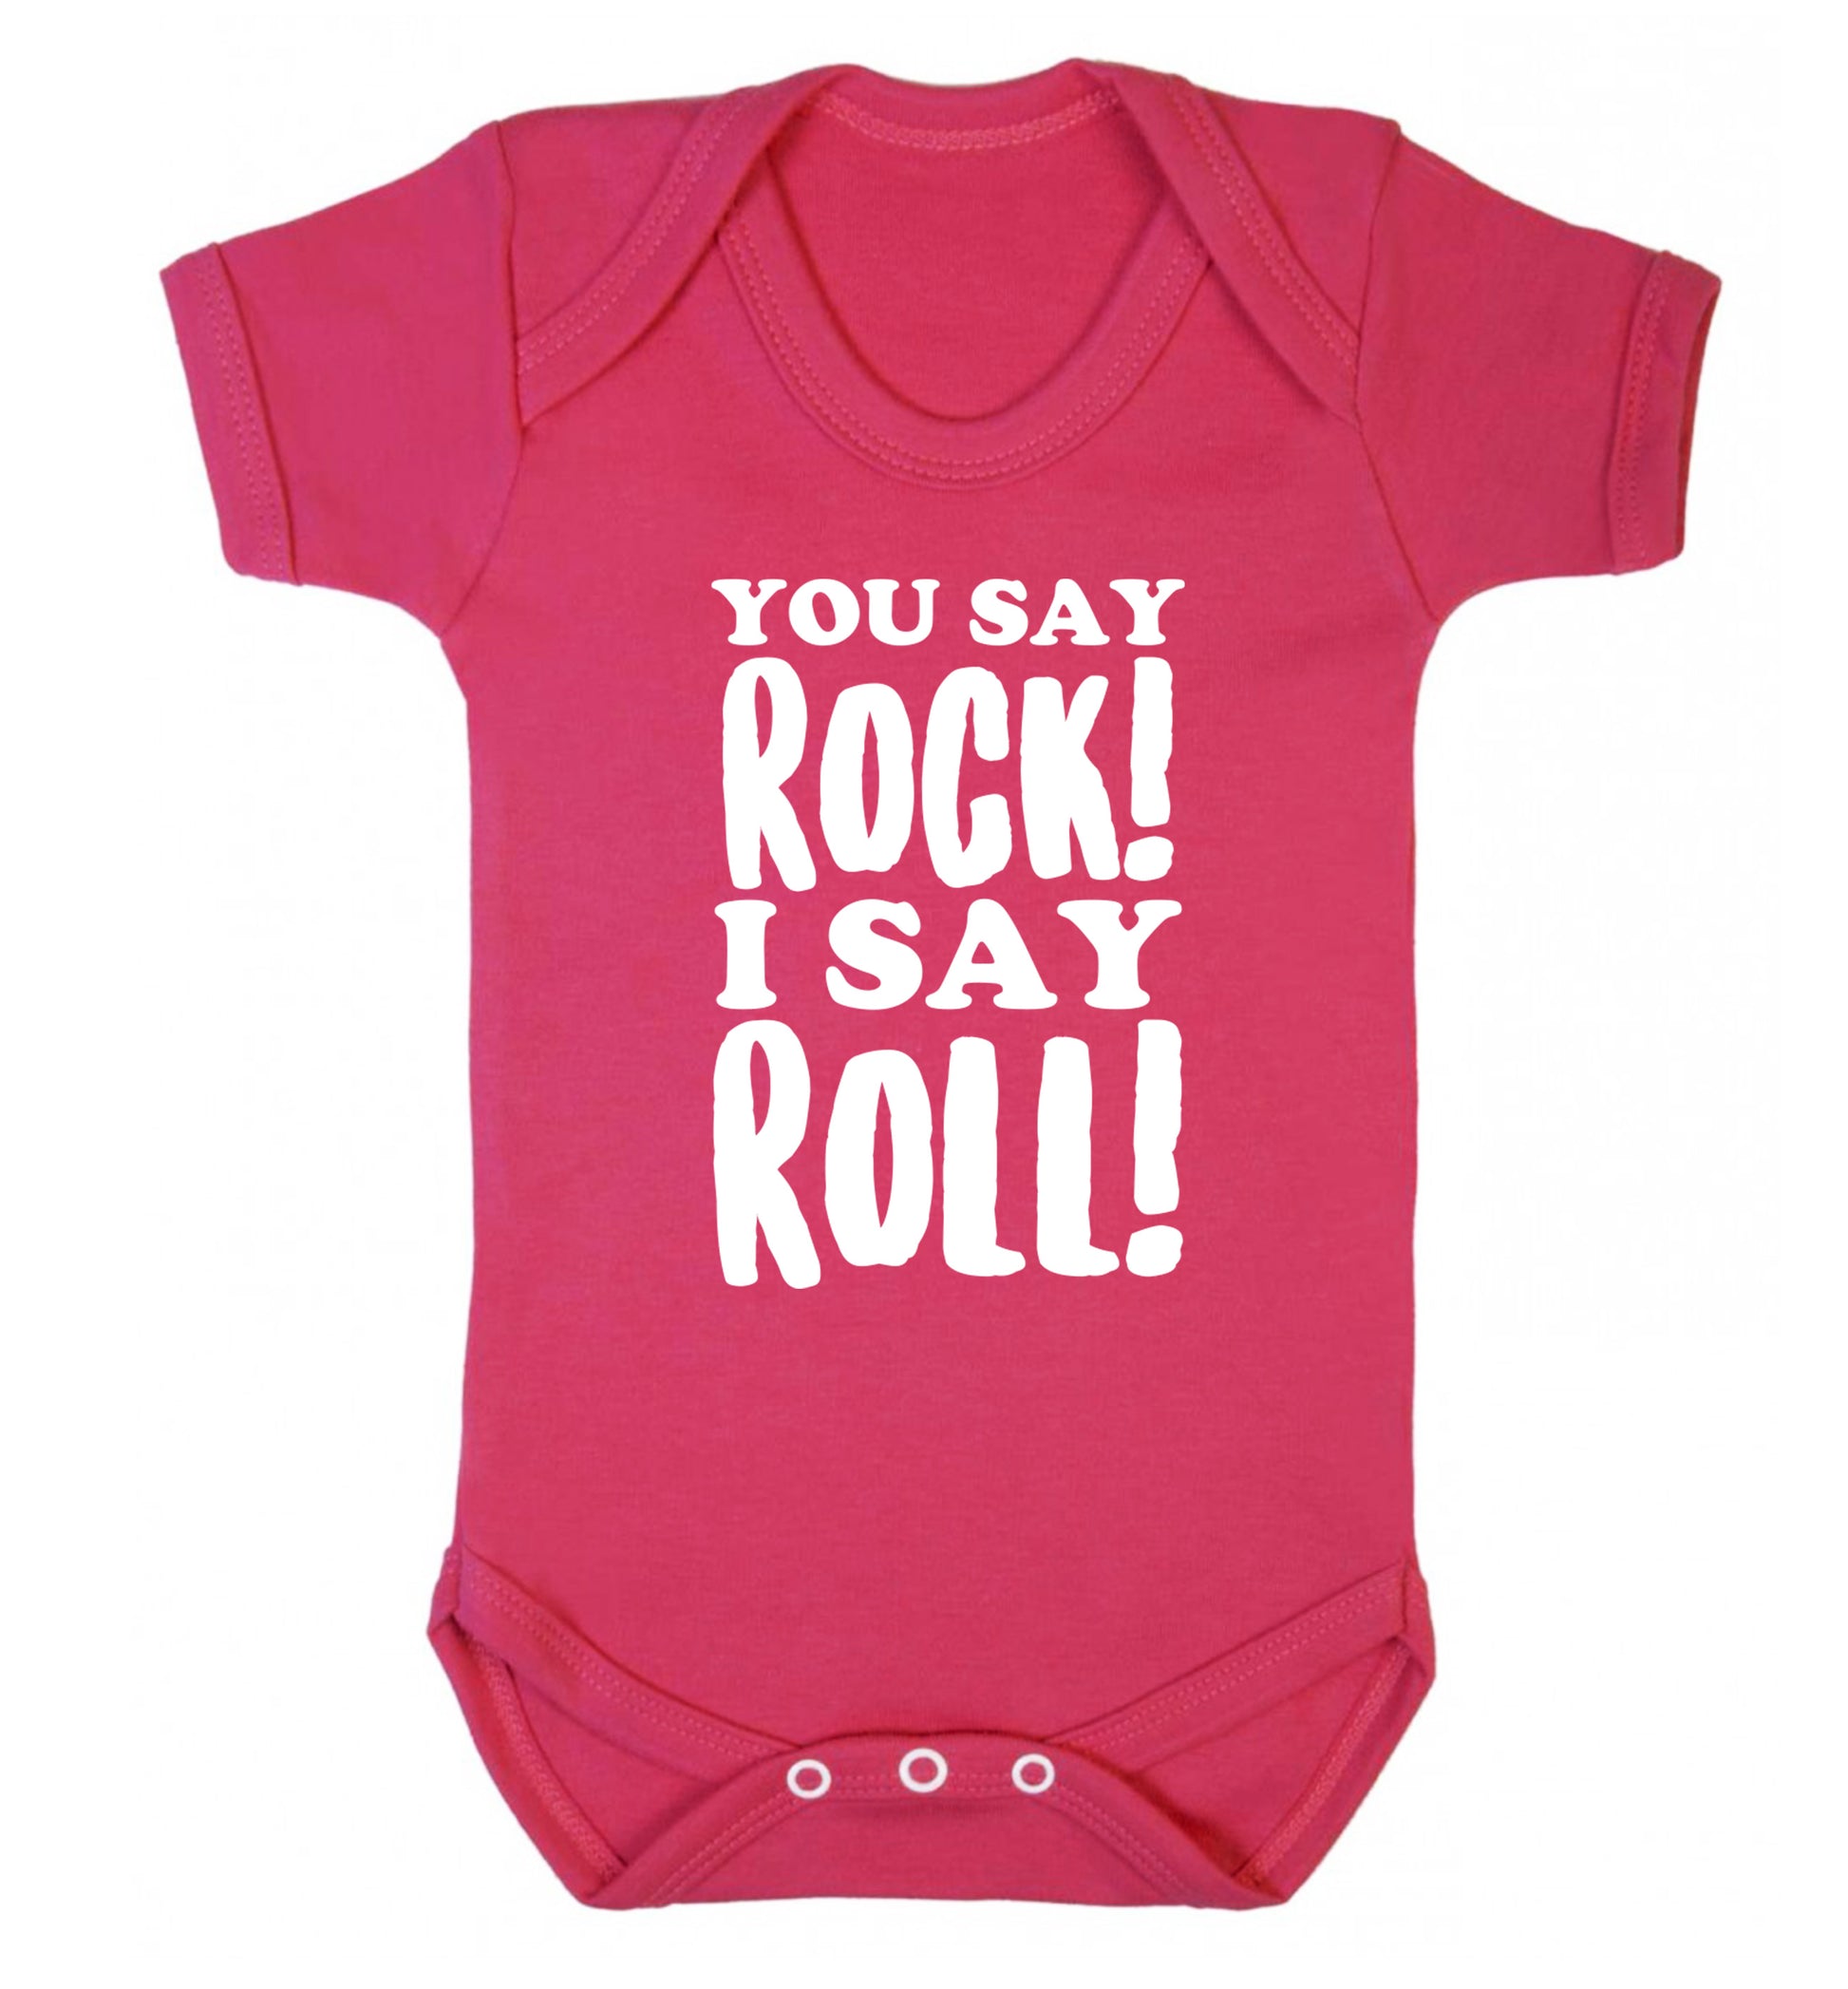 You say rock I say roll! Baby Vest dark pink 18-24 months